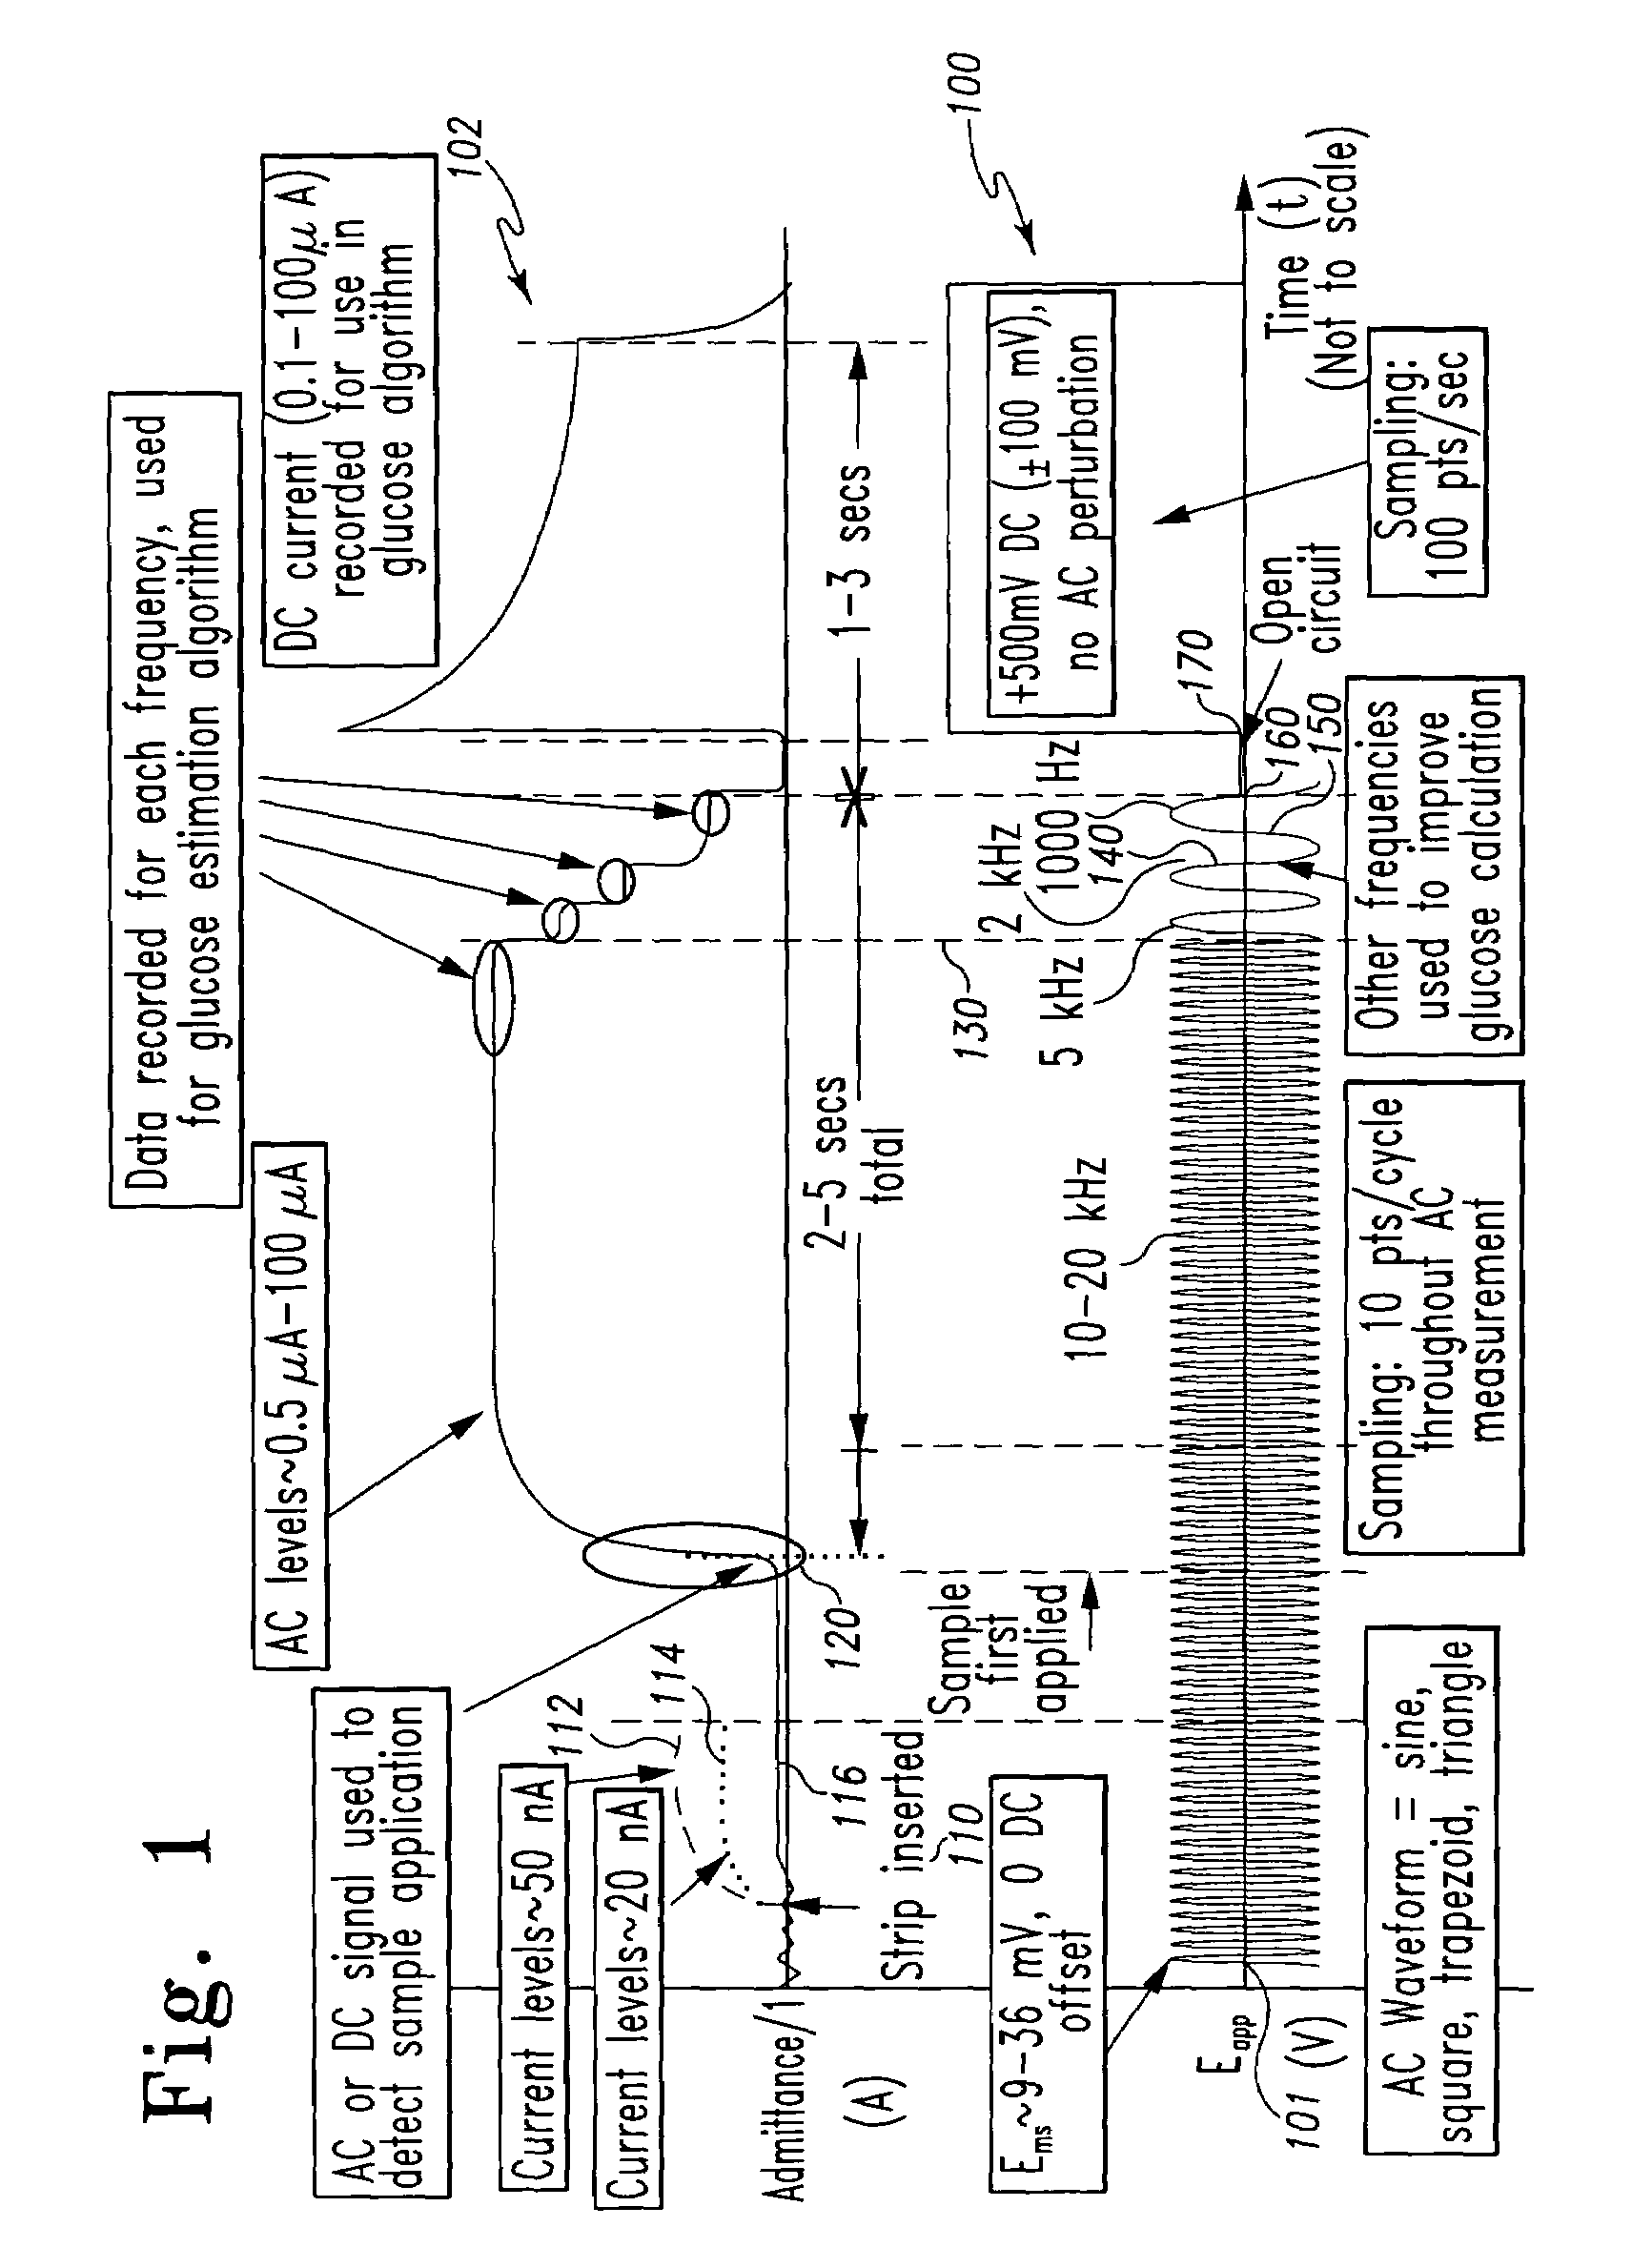 System and method for analyte measurement using dose sufficiency electrodes